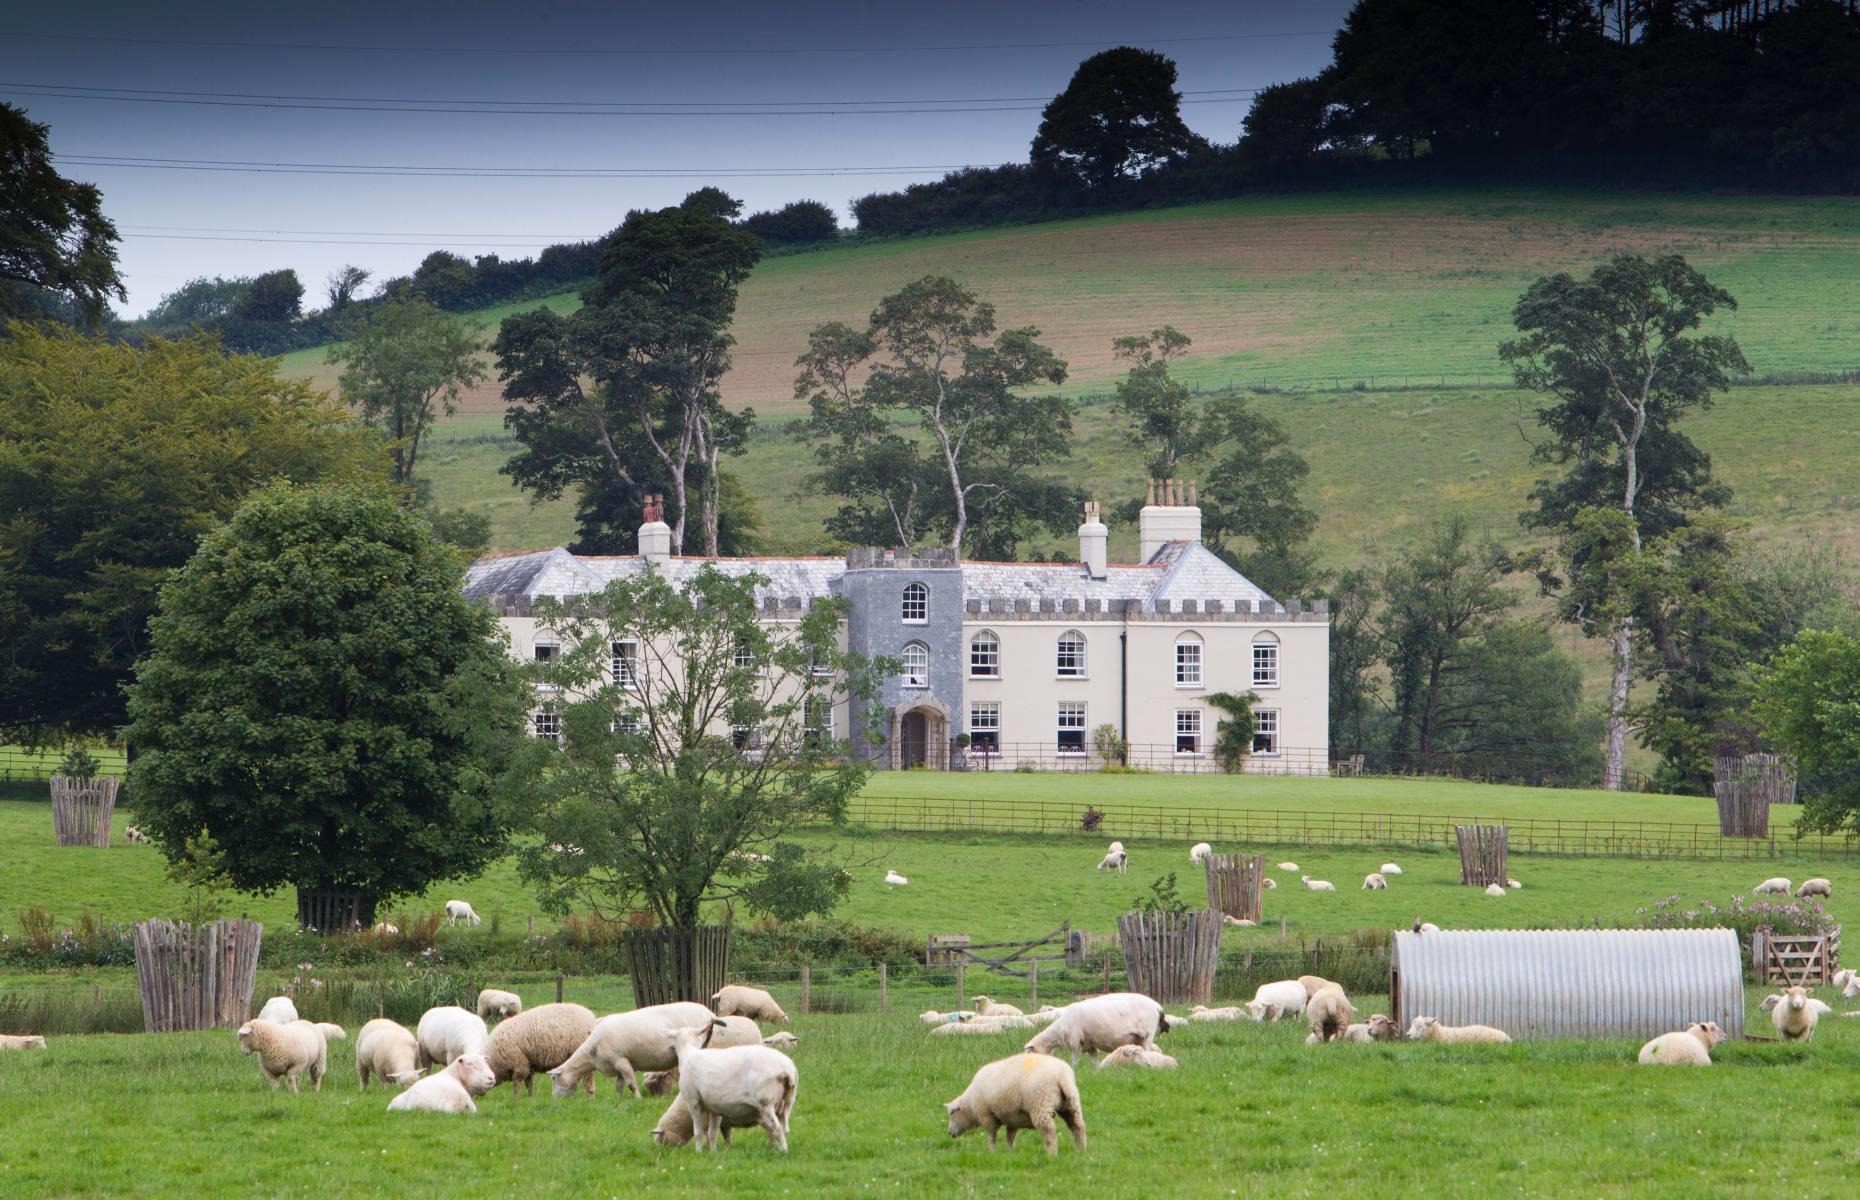 <p>As the eldest son of the reigning British monarch, the Prince of Wales now owns the Duchy of Cornwall, to which Restormel Manor belongs. In stunning grounds and surrounding countryside and just a mile from the medieval village of Lostwithiel, Prince William has stayed at the manor many times.</p>  <p>Before their marriage, according to the <em><a href="https://www.dailymail.co.uk/news/article-1246523/Prince-Charles-charges-Middletons-3-000-week-let-stay-Cornish-holiday-home.html">Daily Mail</a></em>, his wife Kate’s family, the Middletons, rented the property from the then Prince Charles over the Christmas holiday in 2010 for £3,000 ($3.8k) per week.</p>